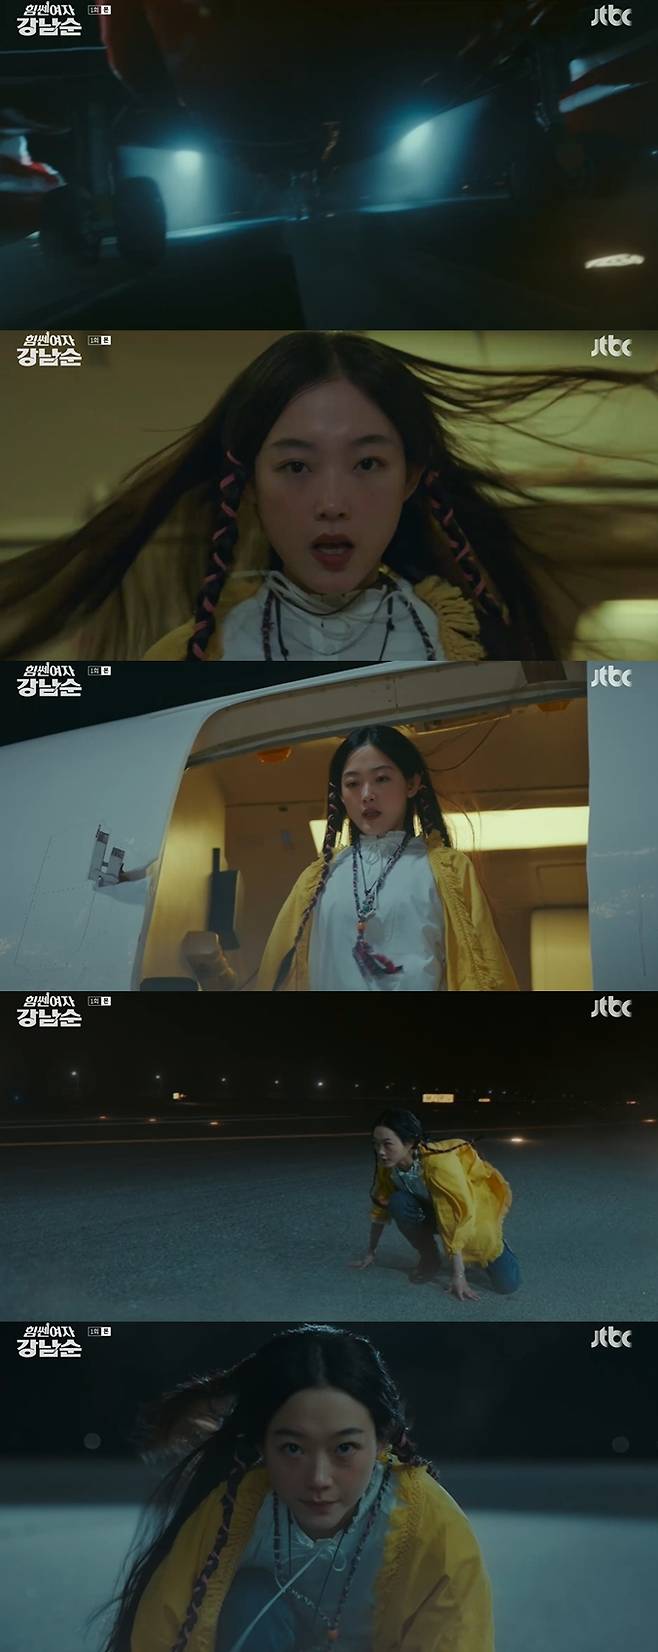 Lee Yoo-mi has returned to Korea to find her biological parents.On the 7th, JTBCs new TOILDrama Strong Girl Nam-soon (hereinafter Kang Nam-sun) episode 1 was broadcast.Kang Nam-sun is the story of Kang Nam-sun (Lee Yoo-Mi), Golden Week (Kim Jung-Eun), and road weight (Kim Hae-sook) who are born with superhuman strength.Five-year-old Kang Nam-sun, who went to Mongolia with his pro-Father Bongo drum, lost his father.The Mongolia couple found Kang Nam-sun crying while searching for Father, but they did not know what the child was talking about. They felt pity and affection for Nam-sun and raised her as a child.Kang Nam-sun grew up wondering where Jasin came from.My mother handed Kang Nam-sun the clothes she was wearing when she first met the couple, and when she saw the letters on her clothes, she realized that Jasin came from Korea.I must have come from Korea, he said to his mother. My name is Kang Nam-sun, Gaya to Korea.Do not worry, I will not leave now. If I leave, my house will be difficult.Years later, Father advised Kang Nam-sun to go to Korea before it was too late, saying, Now Im Gaya to Korea. Kang Nam-sun said, Im going to find the purest man in the world.I will find a man I want to protect, in Korea, he said.Since then, Kang Nam-sun has taken Planes to Korea, separated from his parents.However, just before landing, Planes flaws caused the cabin to become obsolete, and he quickly grasped the situation and broke Planes door and jumped.Kang Nam-sun had the power to surprise everyone, as well as the ability to jump and run.He quickly caught up with Planes and slowed down. Planes almost collided with the bus, but fortunately he avoided the bus, and Kang Nam-sun stopped Planes by force.At the moment Kang Nam-sun showed Superhuman strength, Golden Week and road weight sensed a mysterious aura.Golden Week has been holding a strength contest to find Kang Nam-sun, and was mistaken for finding a biological daughter in the contest.He believed Lee Hwa-ja (Choi Hee-jin) to be a biological daughter and provided a luxurious life.So I felt a mysterious aura while I was in daily life with Lee. Golden Week showed a surprised expression when he saw Lee who greeted Jasin.Photograph: JTBC